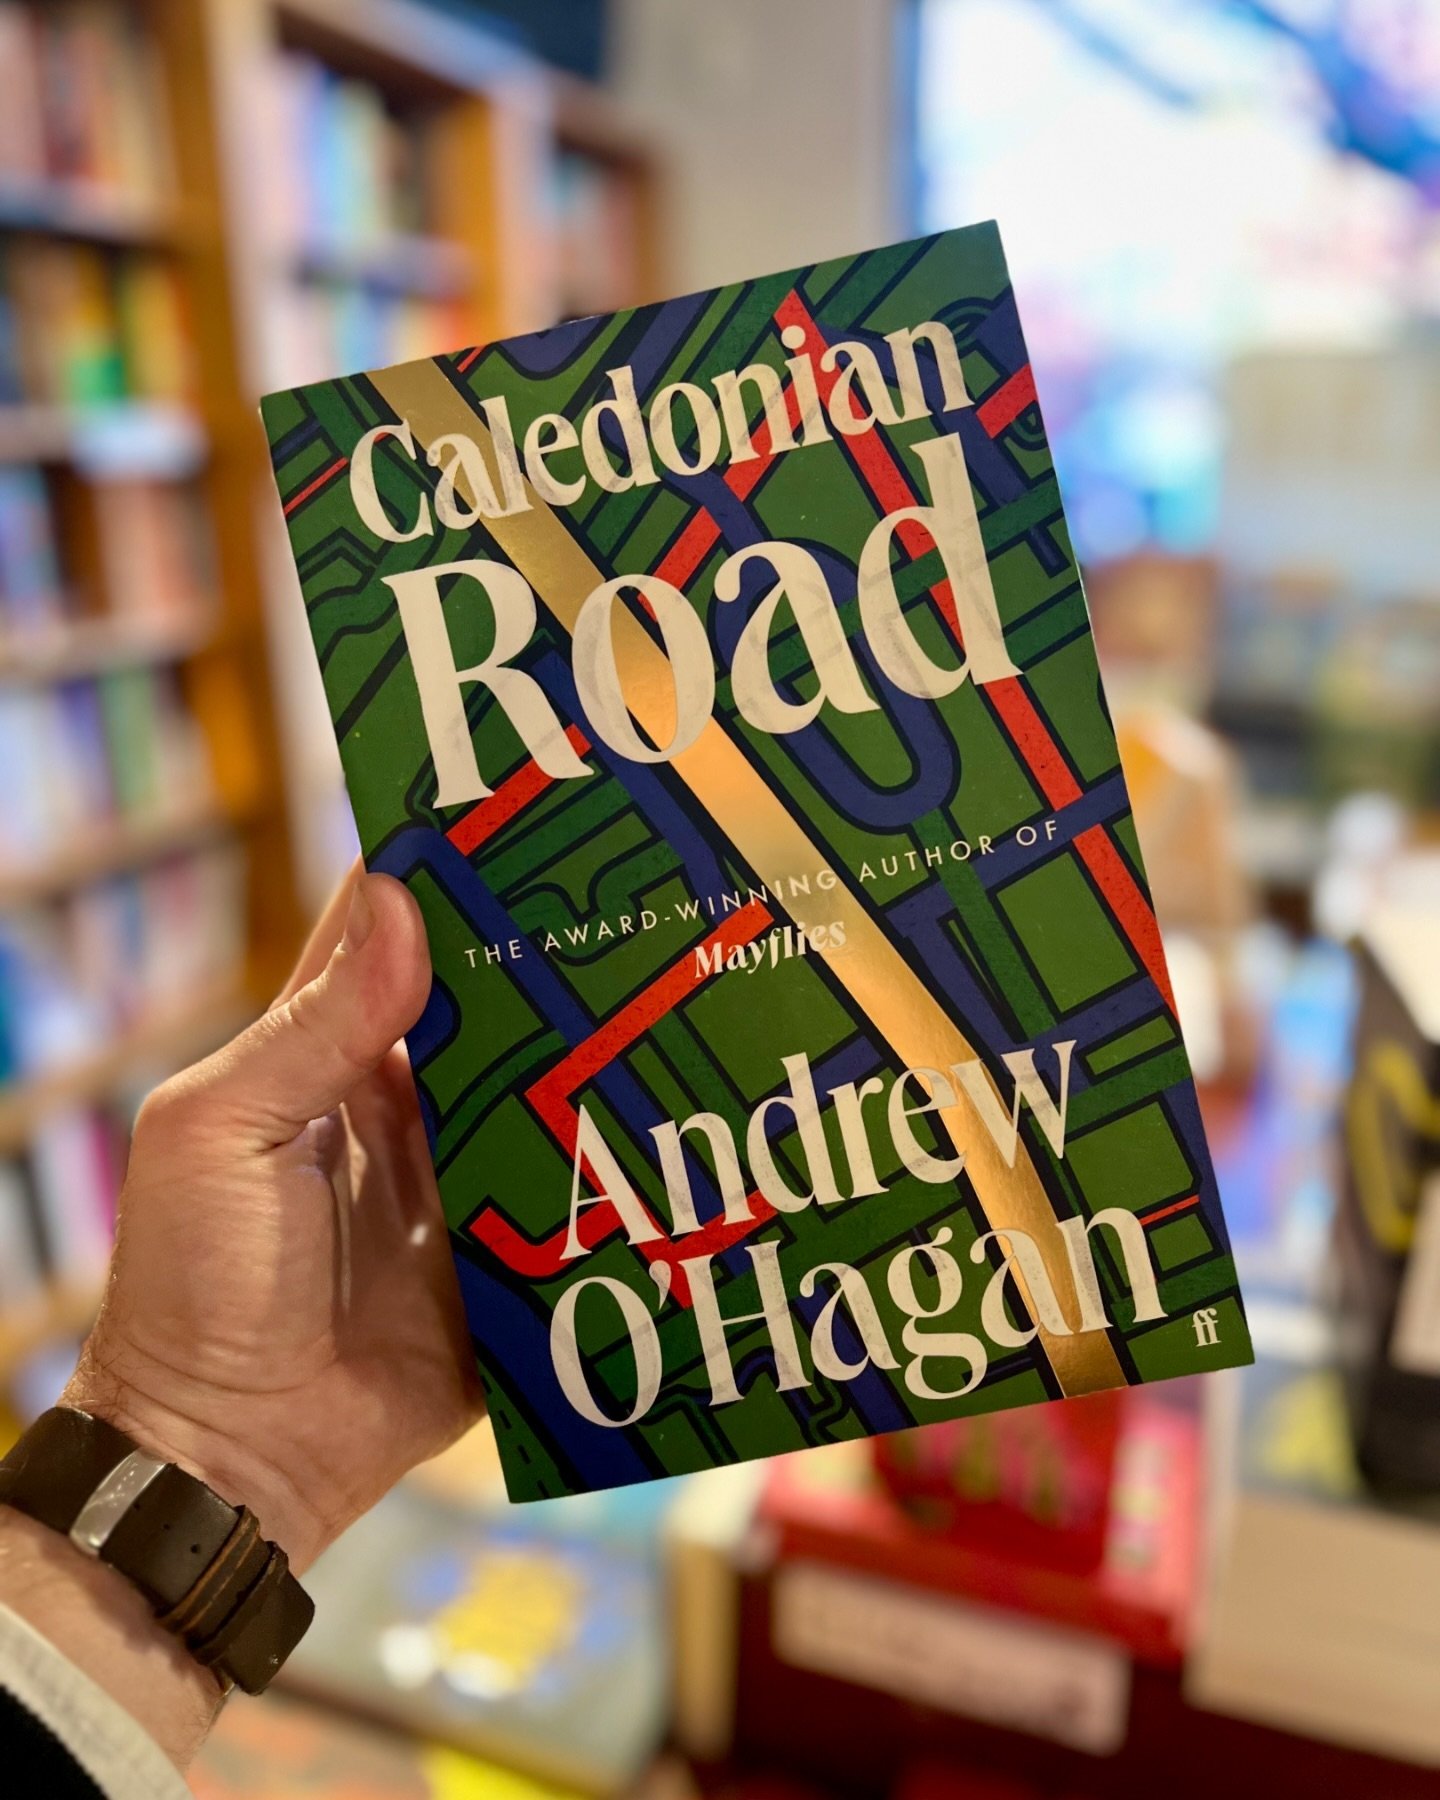 💙❤️ A BOOK WE LOVE ❤️💙

🖌️ Caledonian Road by Andrew O&rsquo;Hagan 🖼️

A sweeping state-of-the-nation novel, Caledonian Road may lack some of the emotional punch of his much-loved Mayflies, but the giddy joy of this Dickensian page-turner makes u